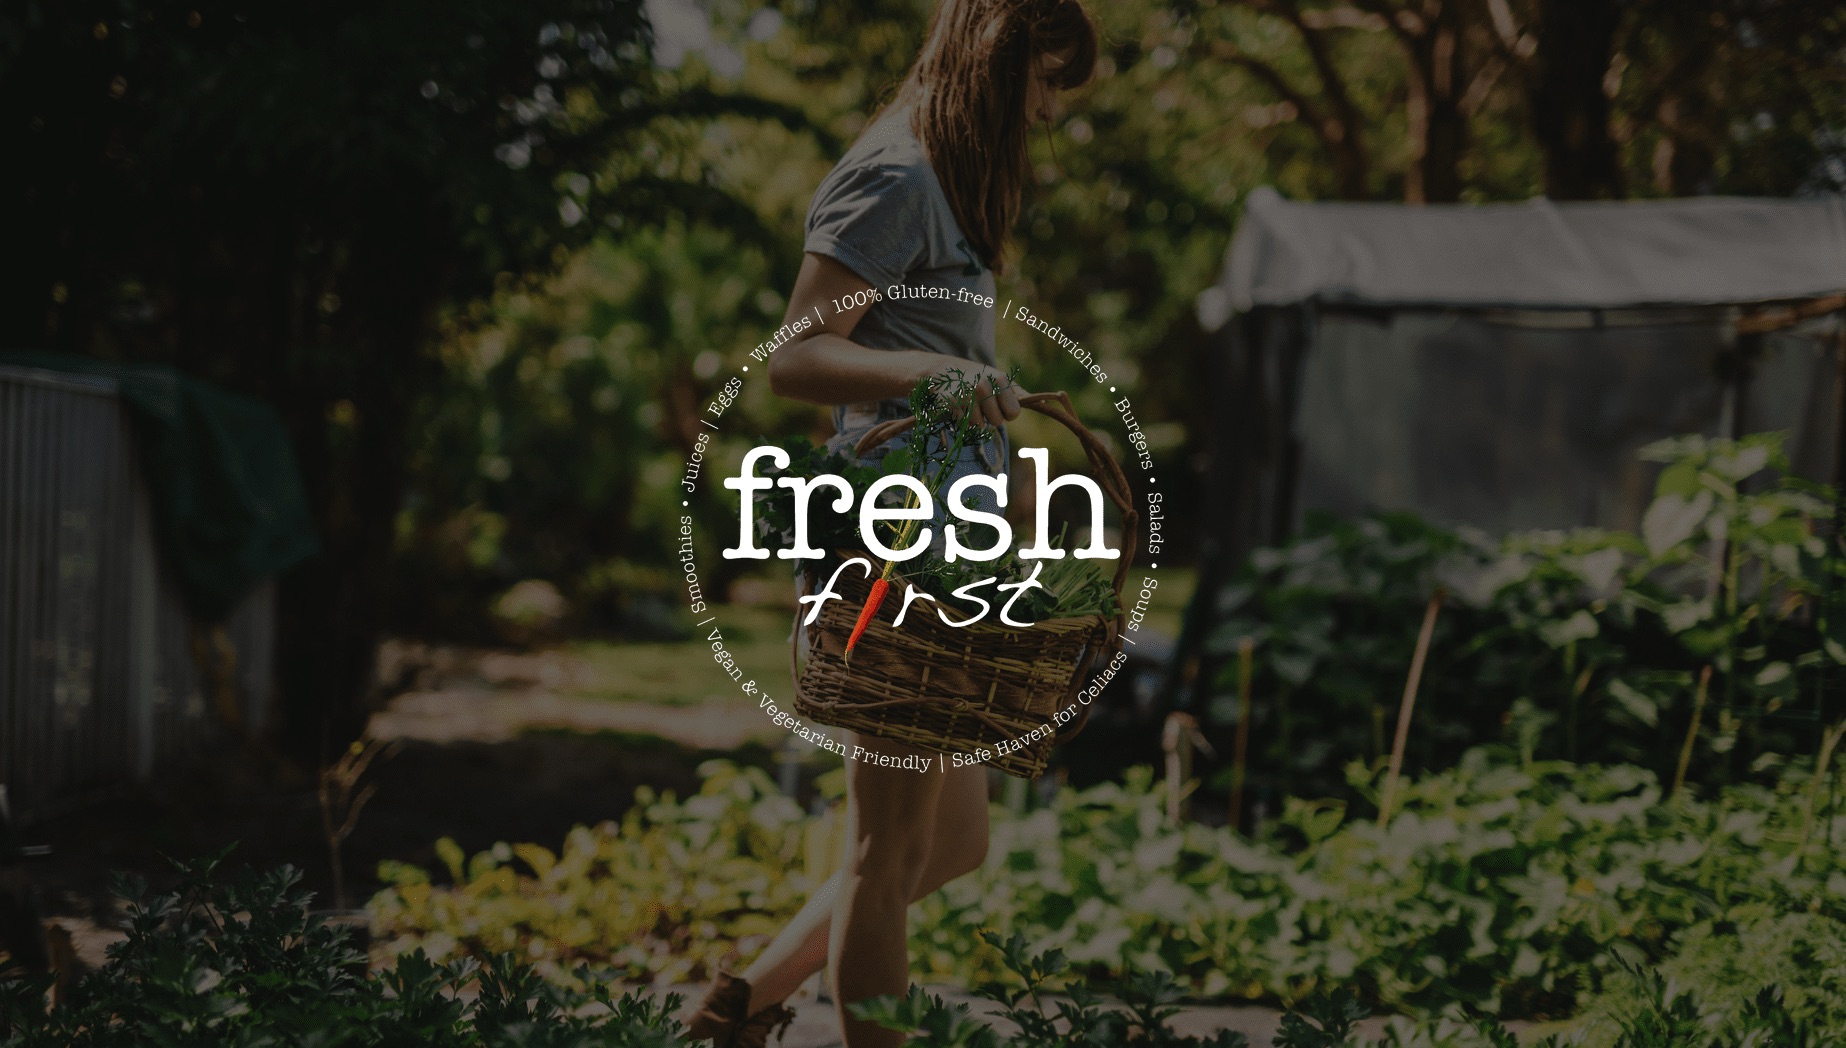 IU White Fresh First logo with a woman tending to a garden in the background carrying a basket of produce